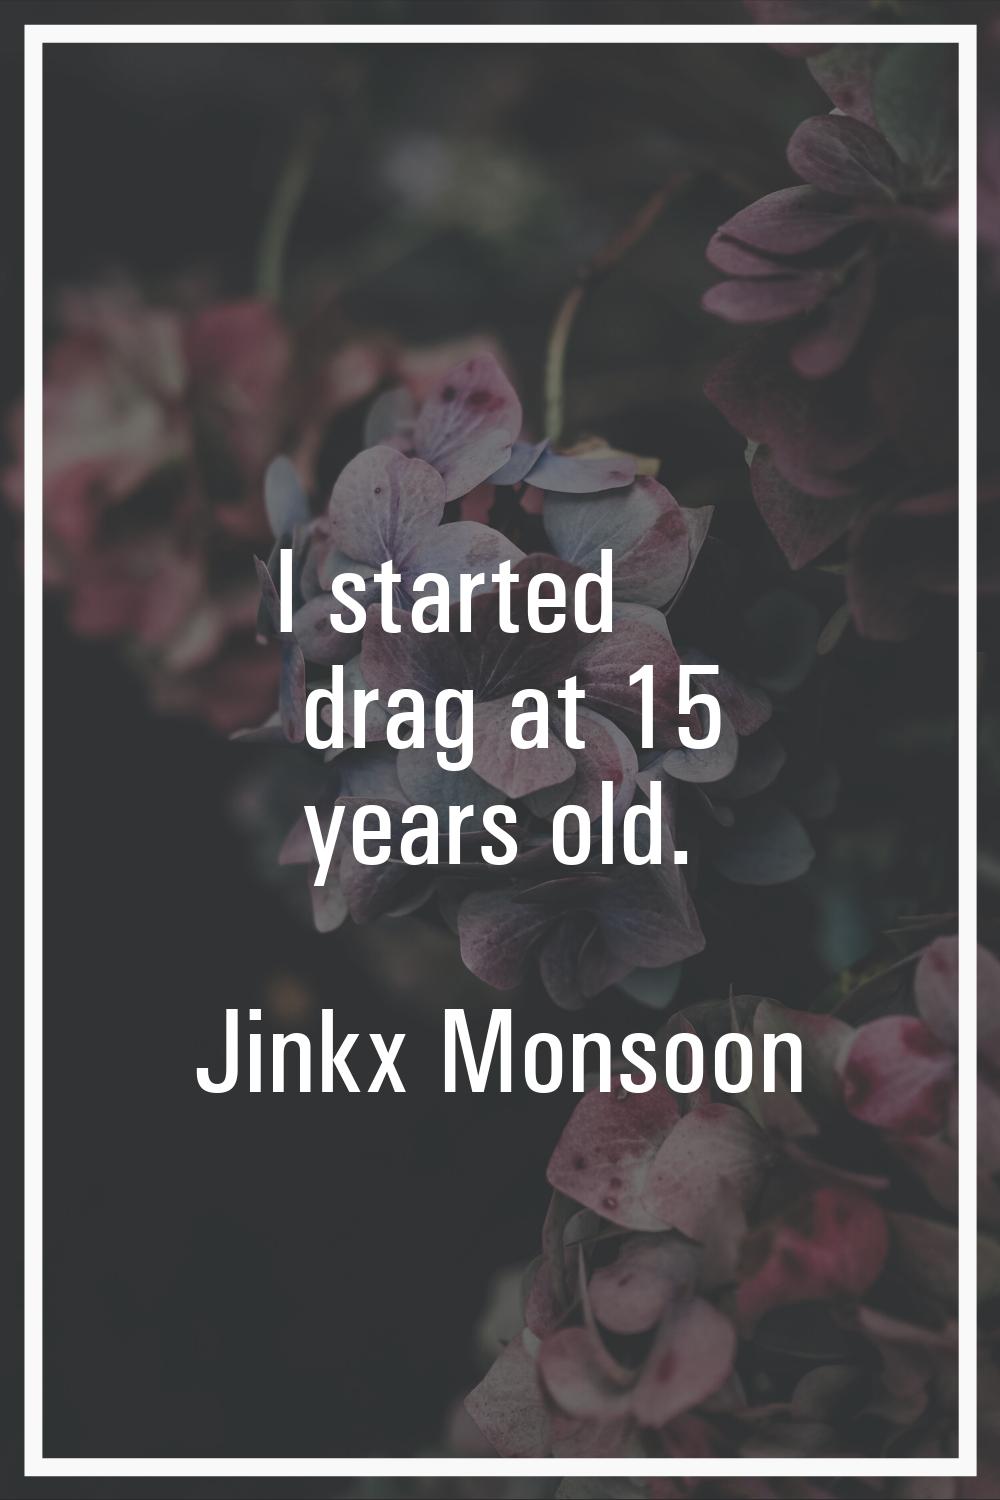 I started drag at 15 years old.